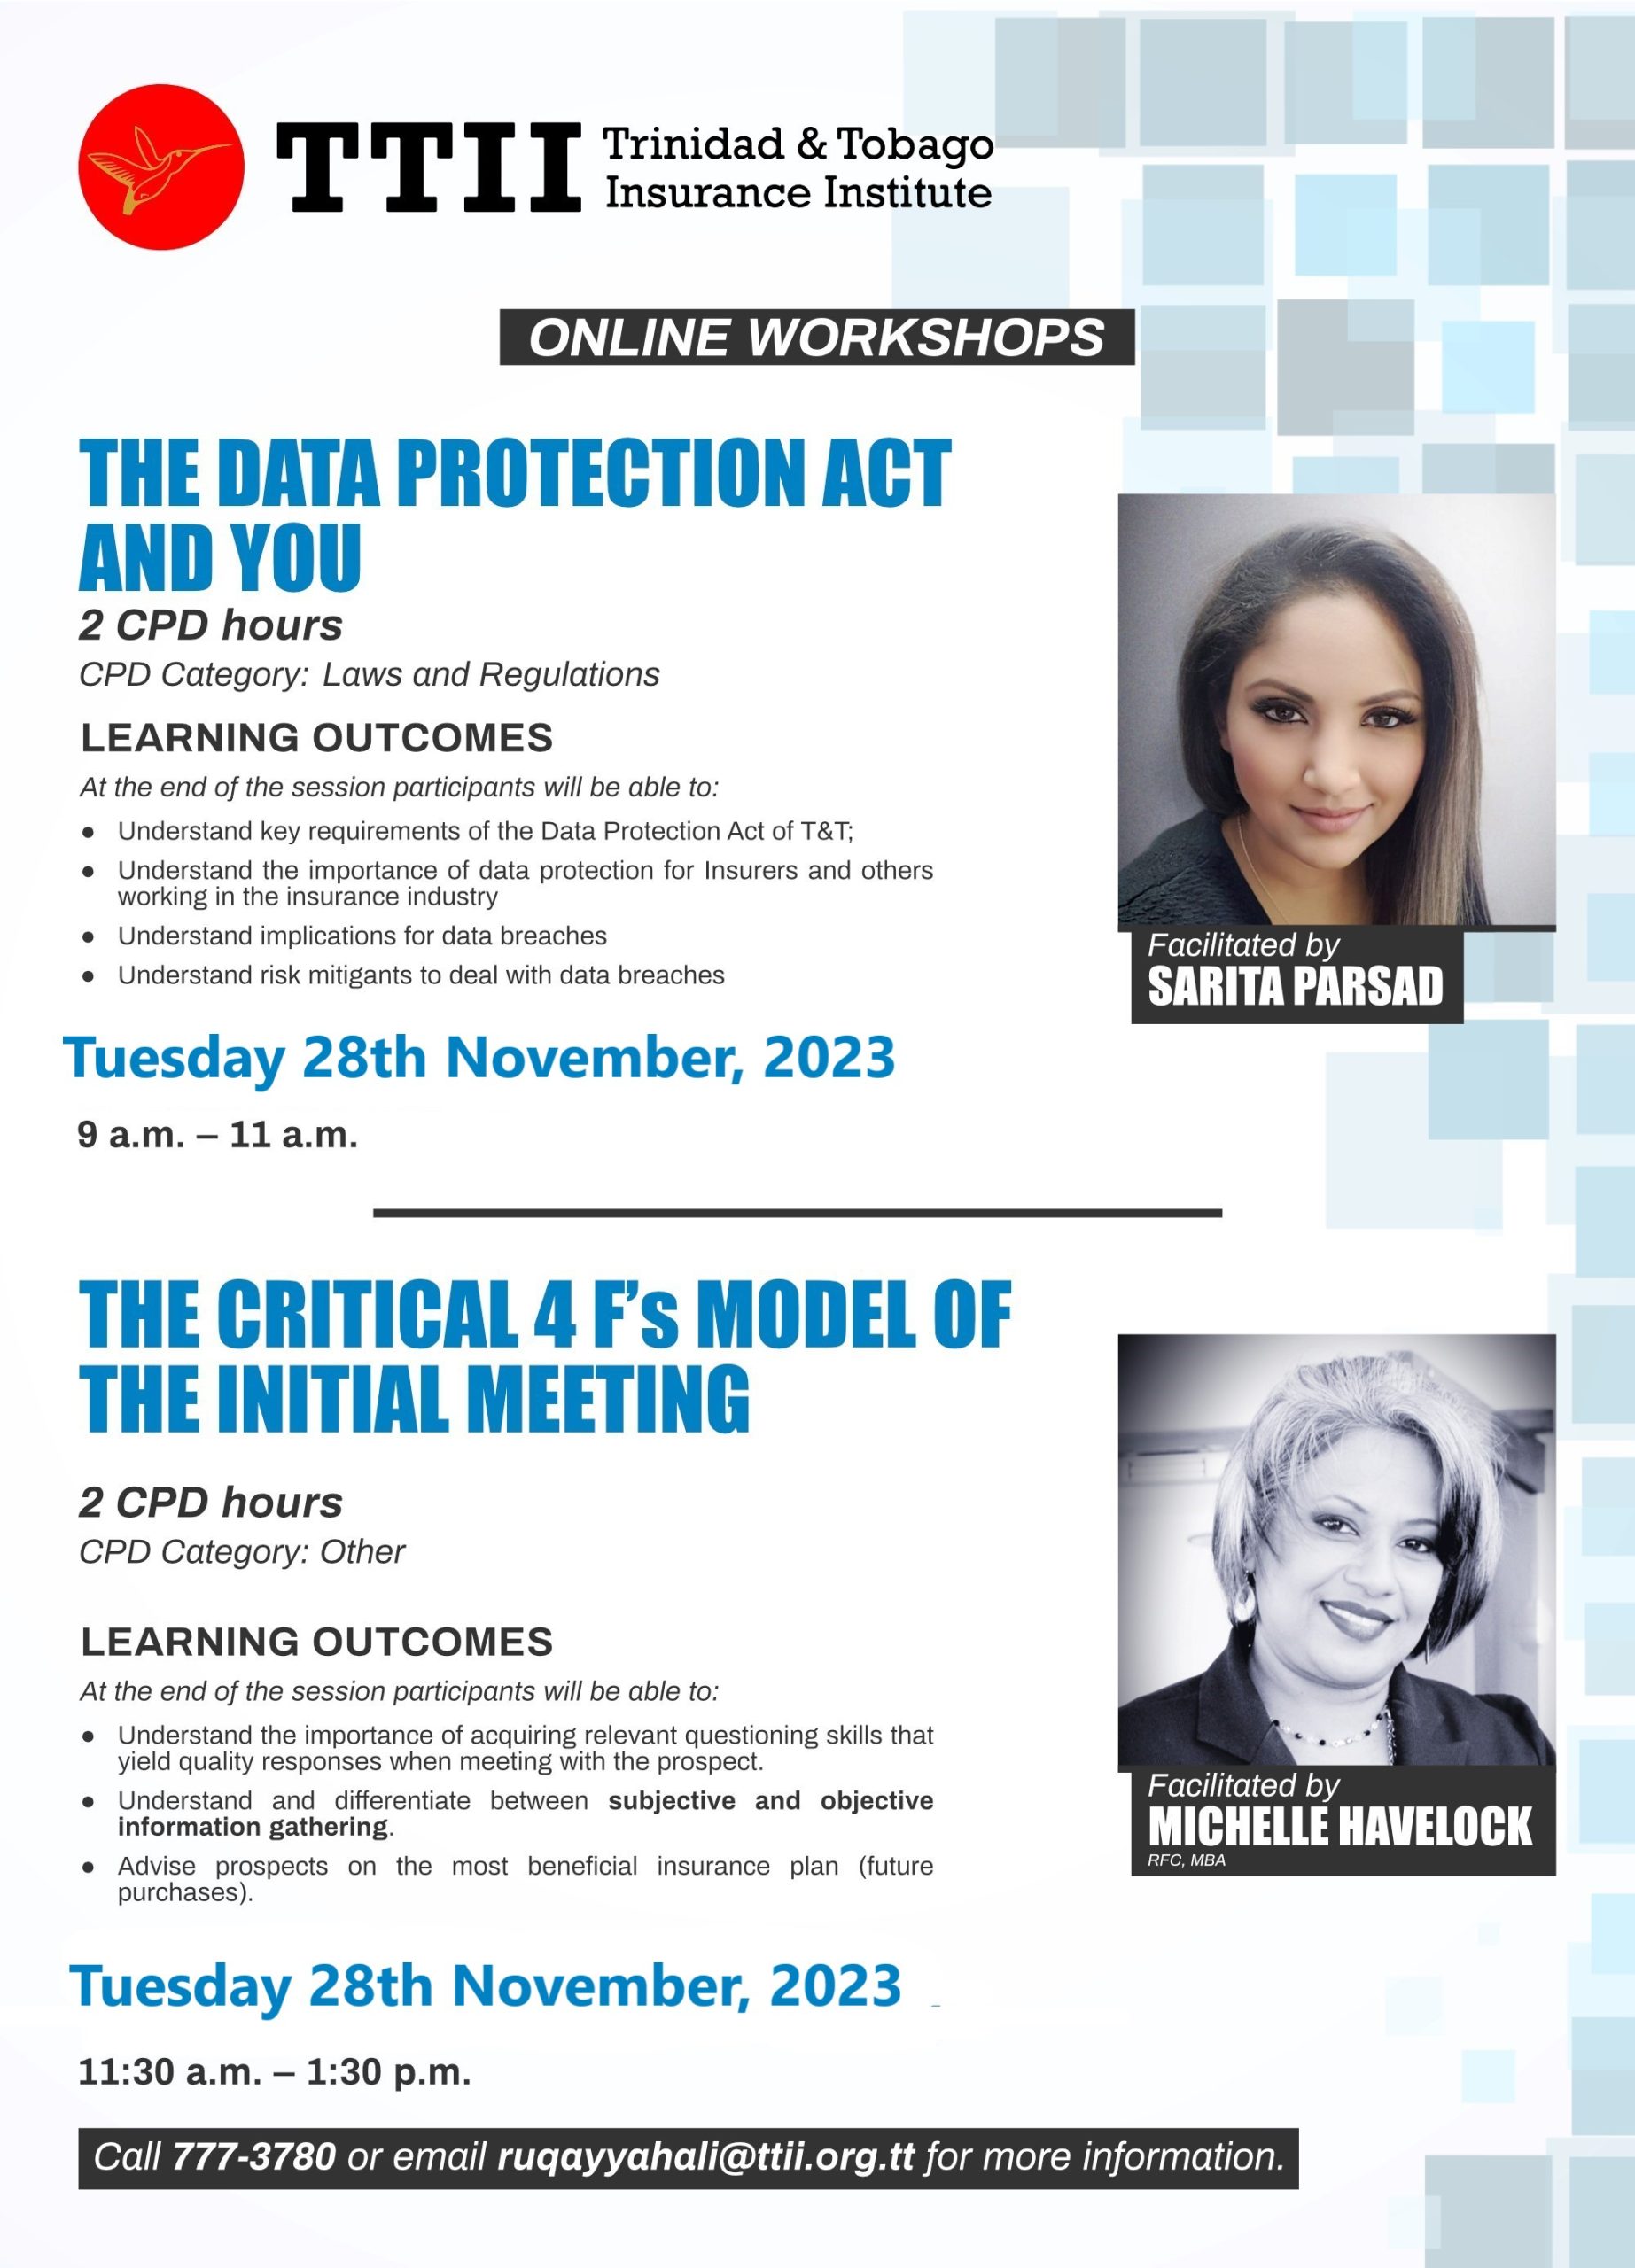 The Data Protection Act and the Critical 4 F's